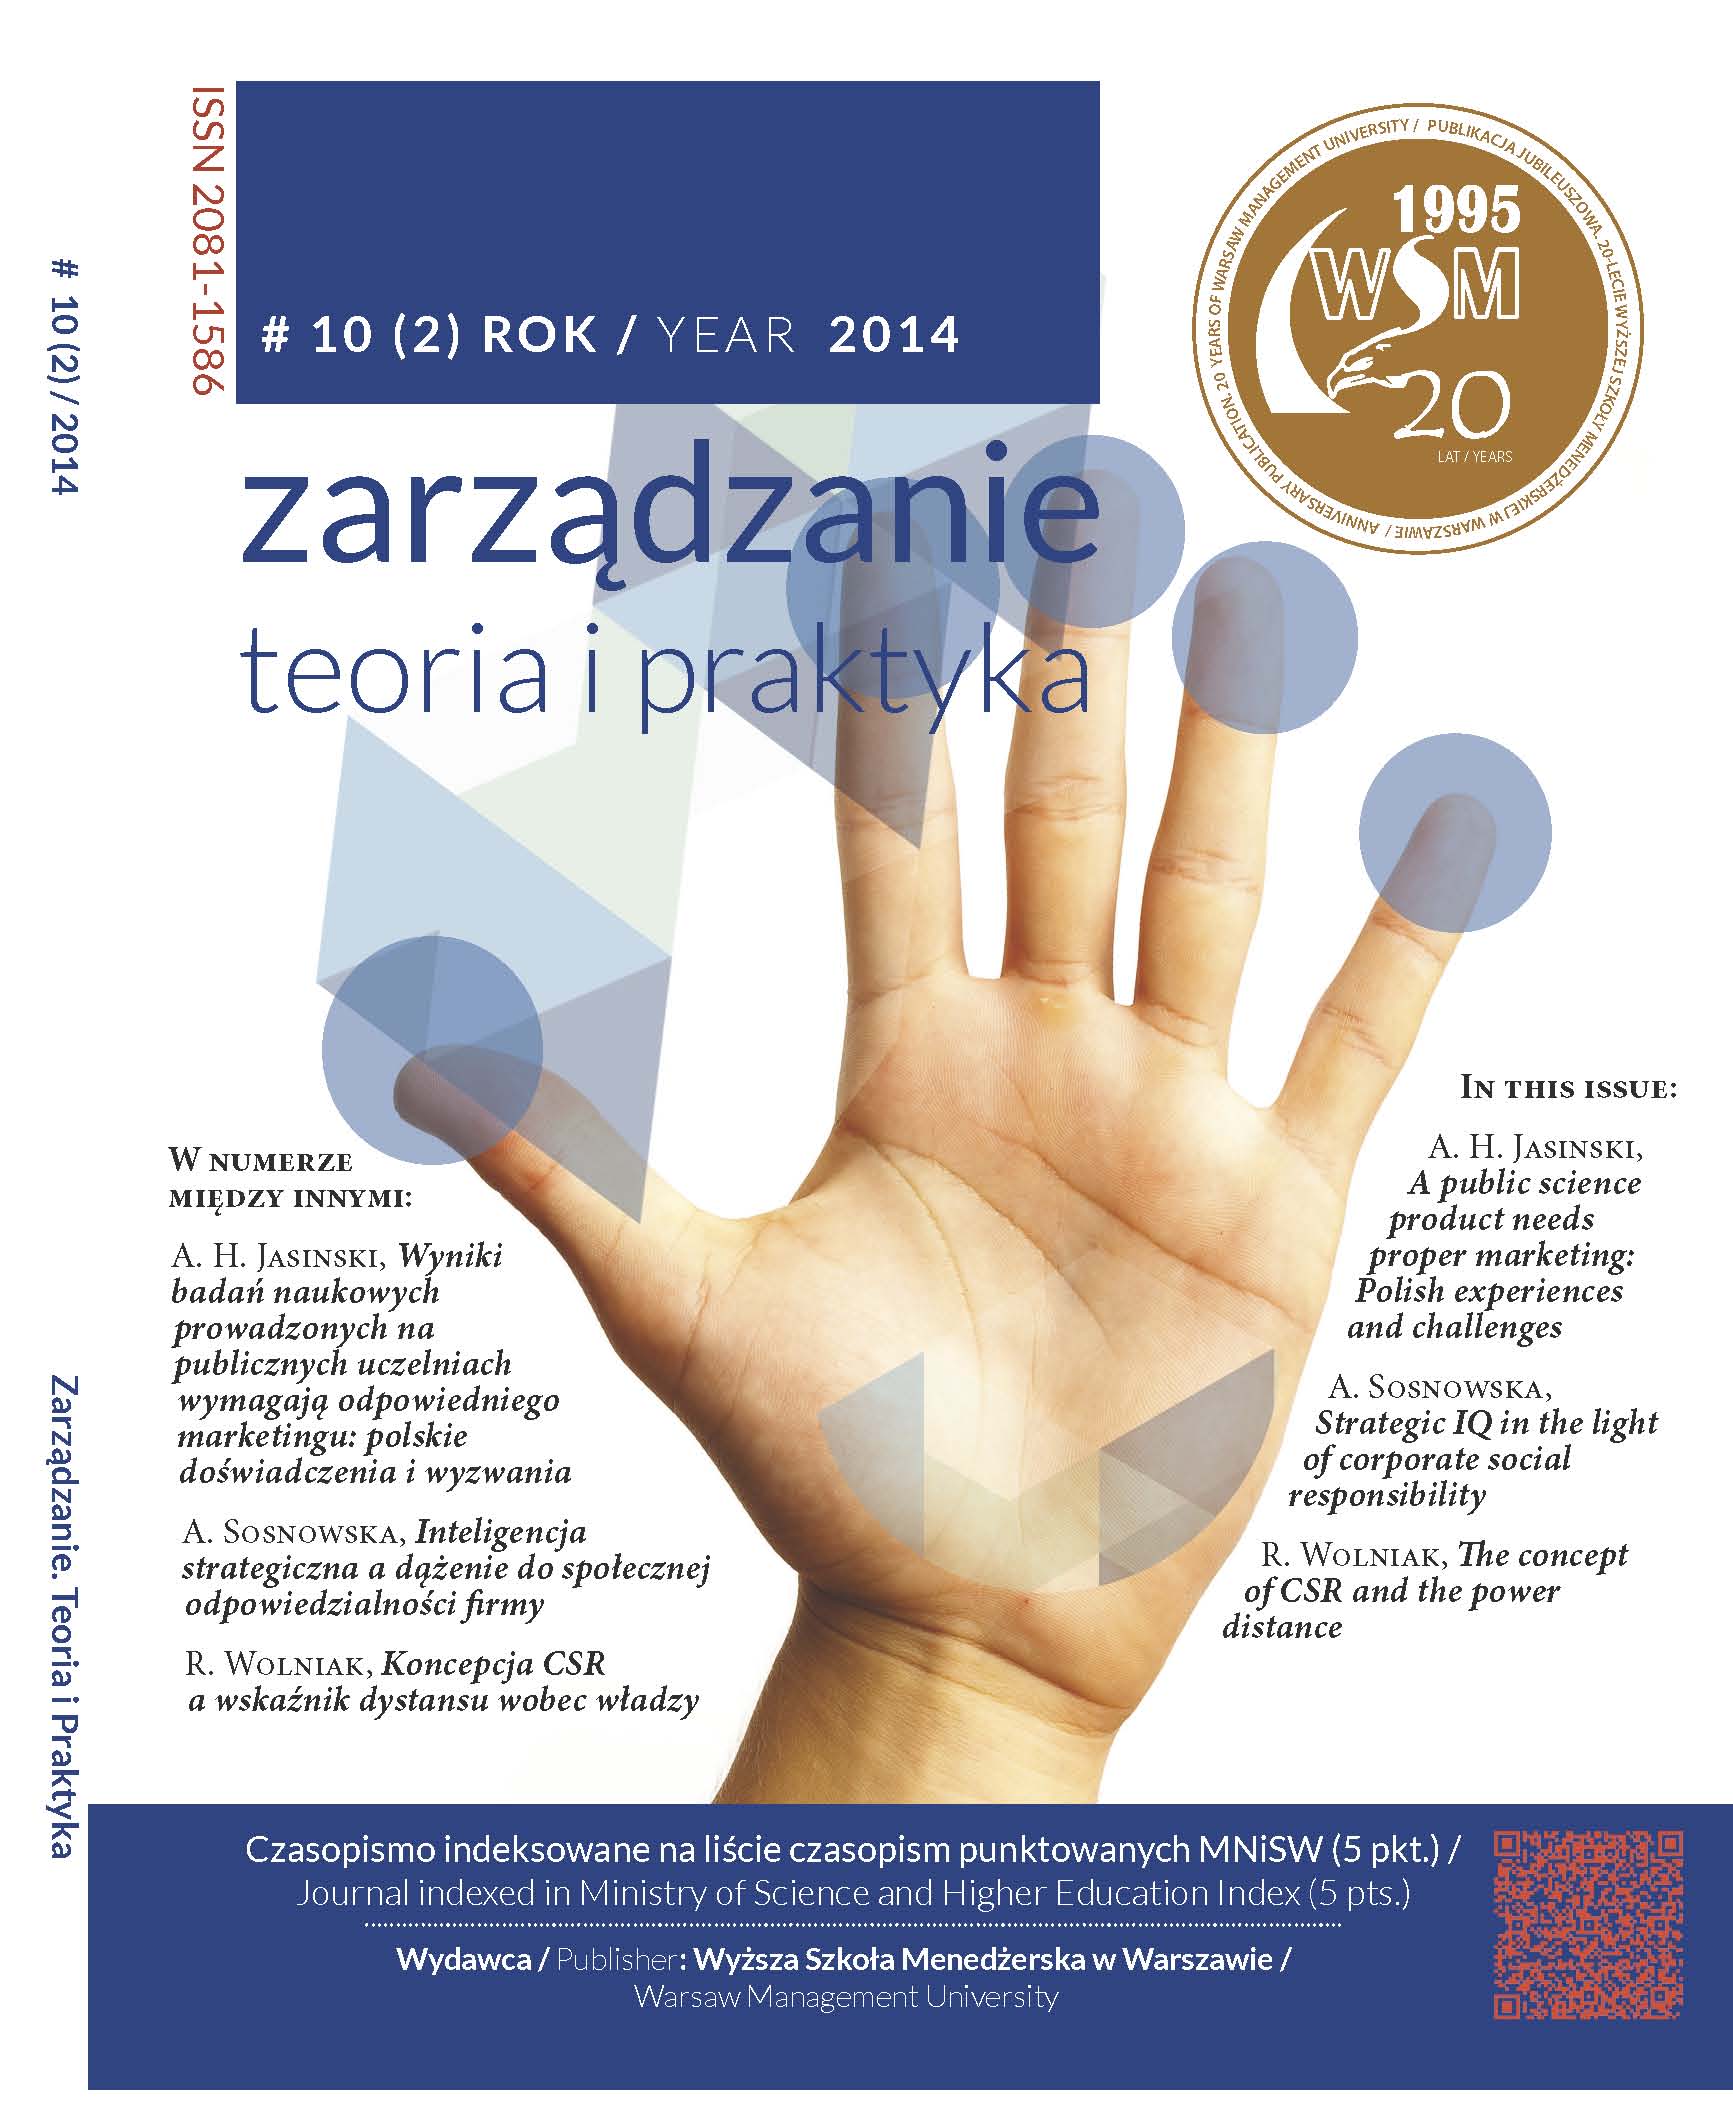 A public science product needs proper marketing: Polish experiences and challenges Cover Image